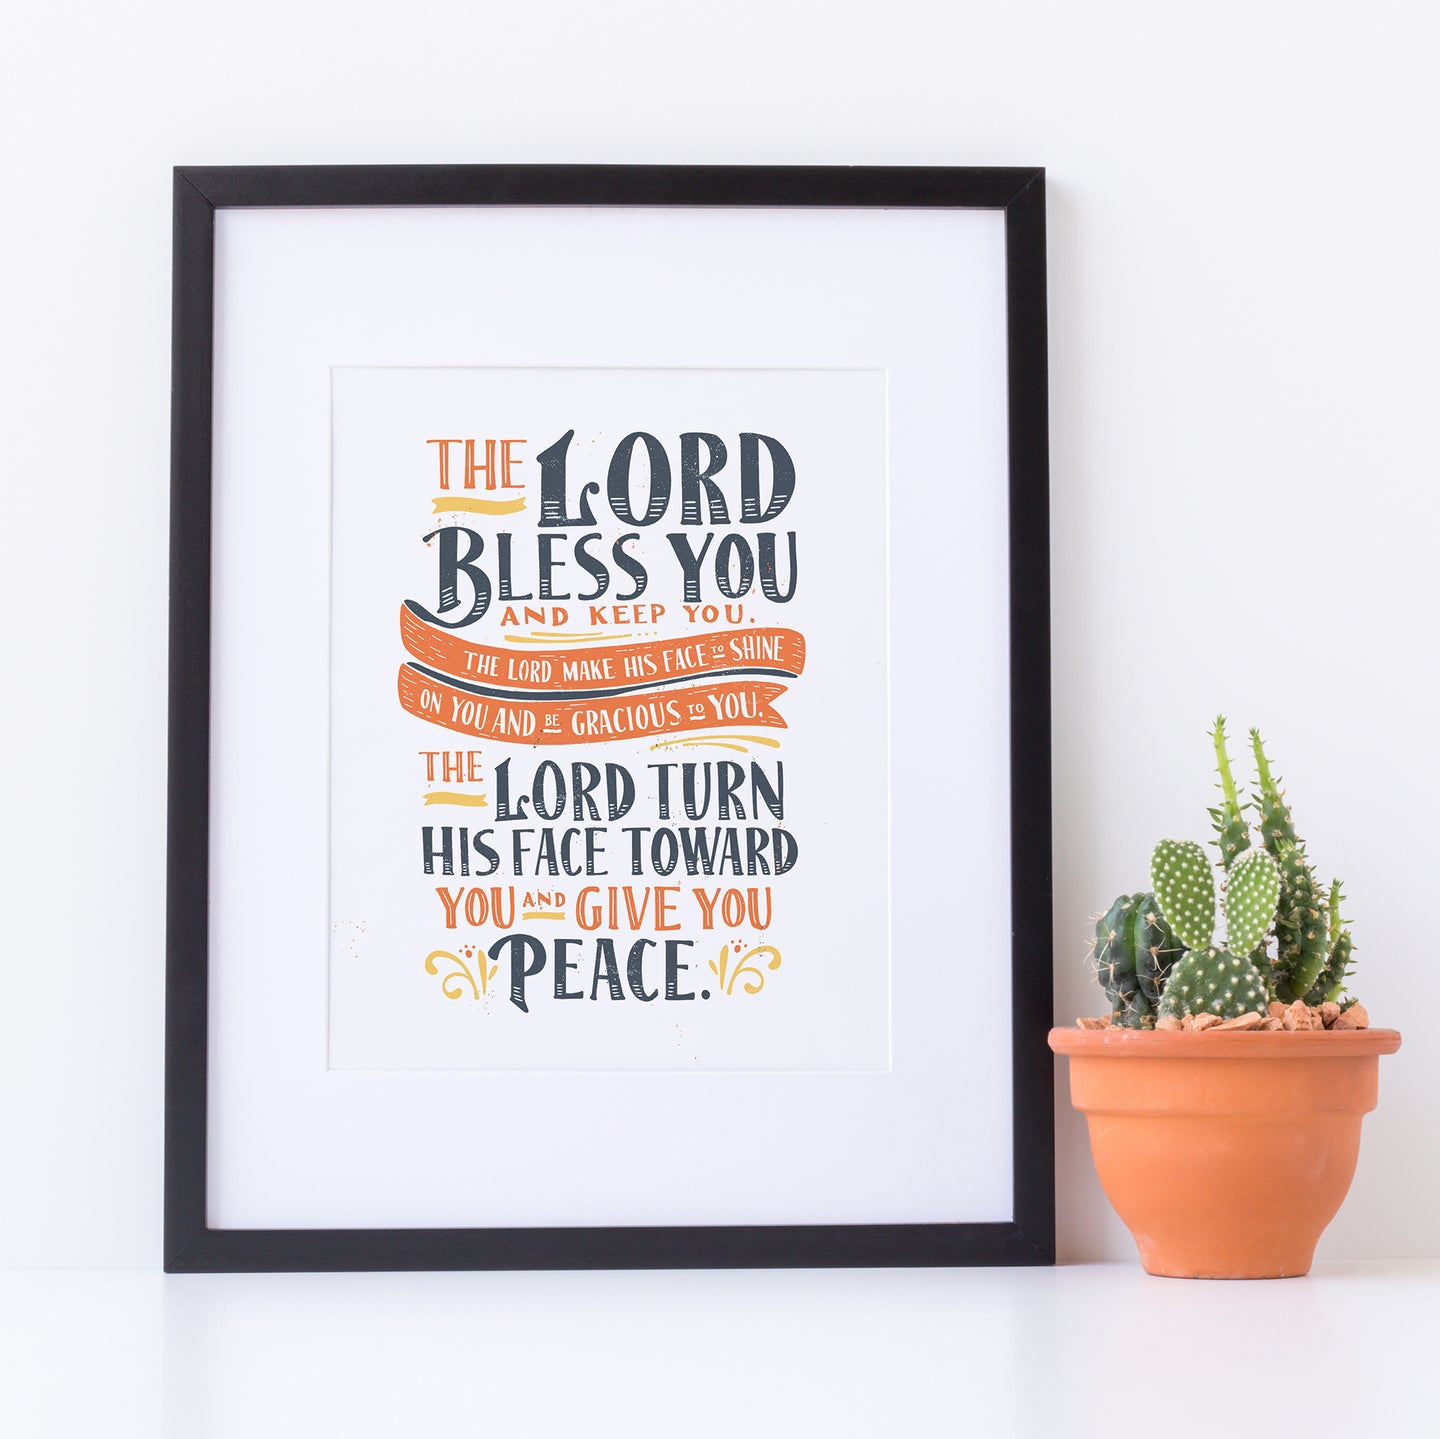 Artwork in a black frame with the with a white matte. The frame is leaning on a white counter with a terracota pot with a catcus next to it. The artwork features hand drawn lettering of the Bible verse Numbers 6:24-26 reading 